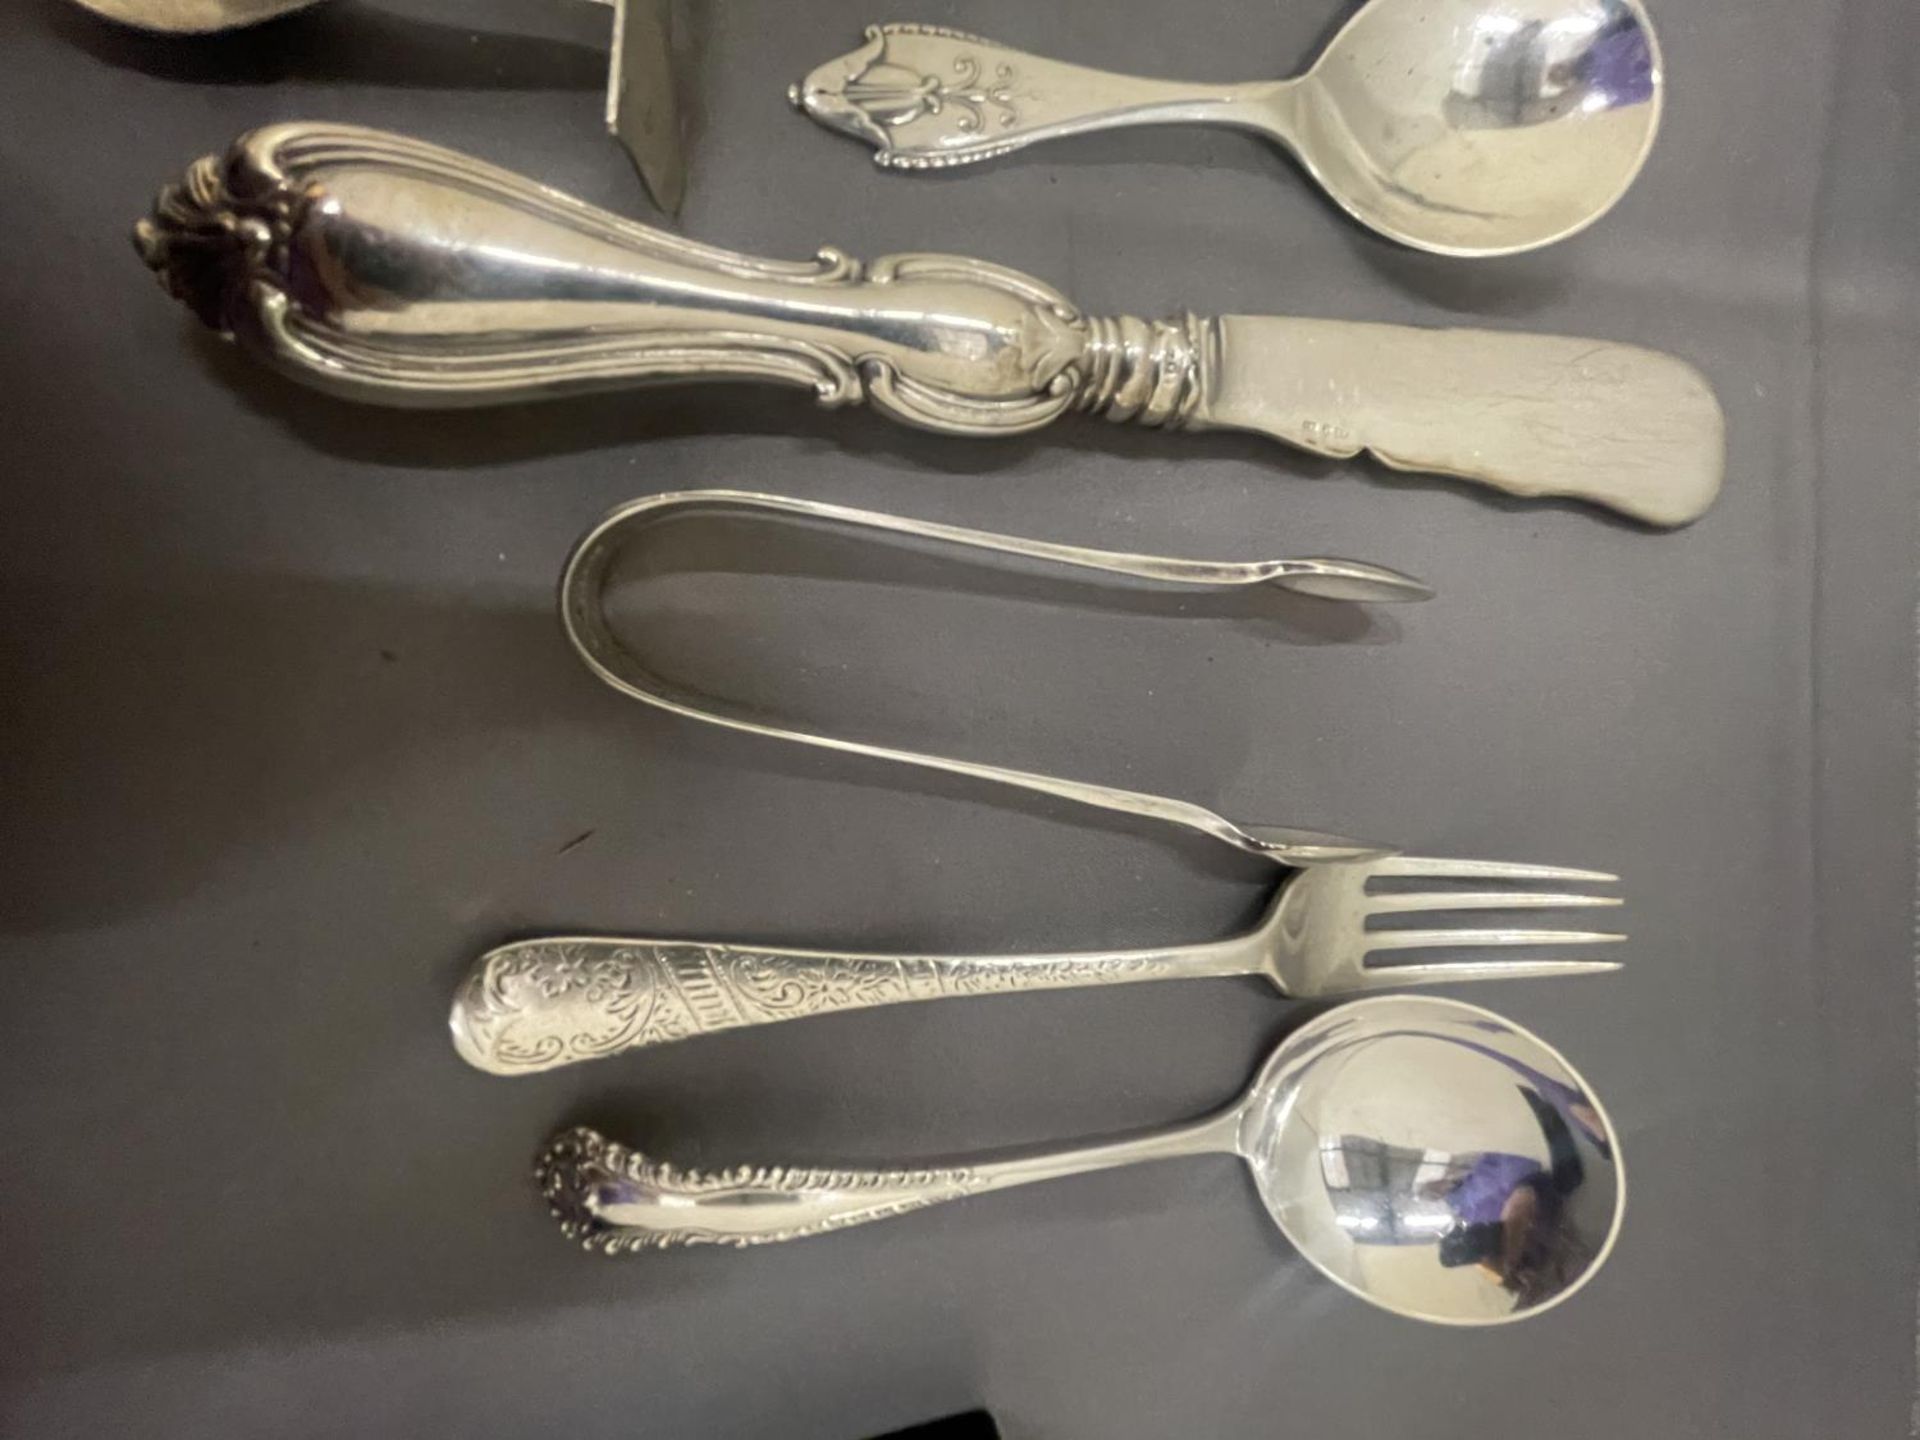 EIGHT VARIOUS MARKED SILVER ITEMS TO INCLUDES SPOONS, NIPS, FORKS ETC GROSS WEIGHT 167 GRAMS - Image 5 of 10